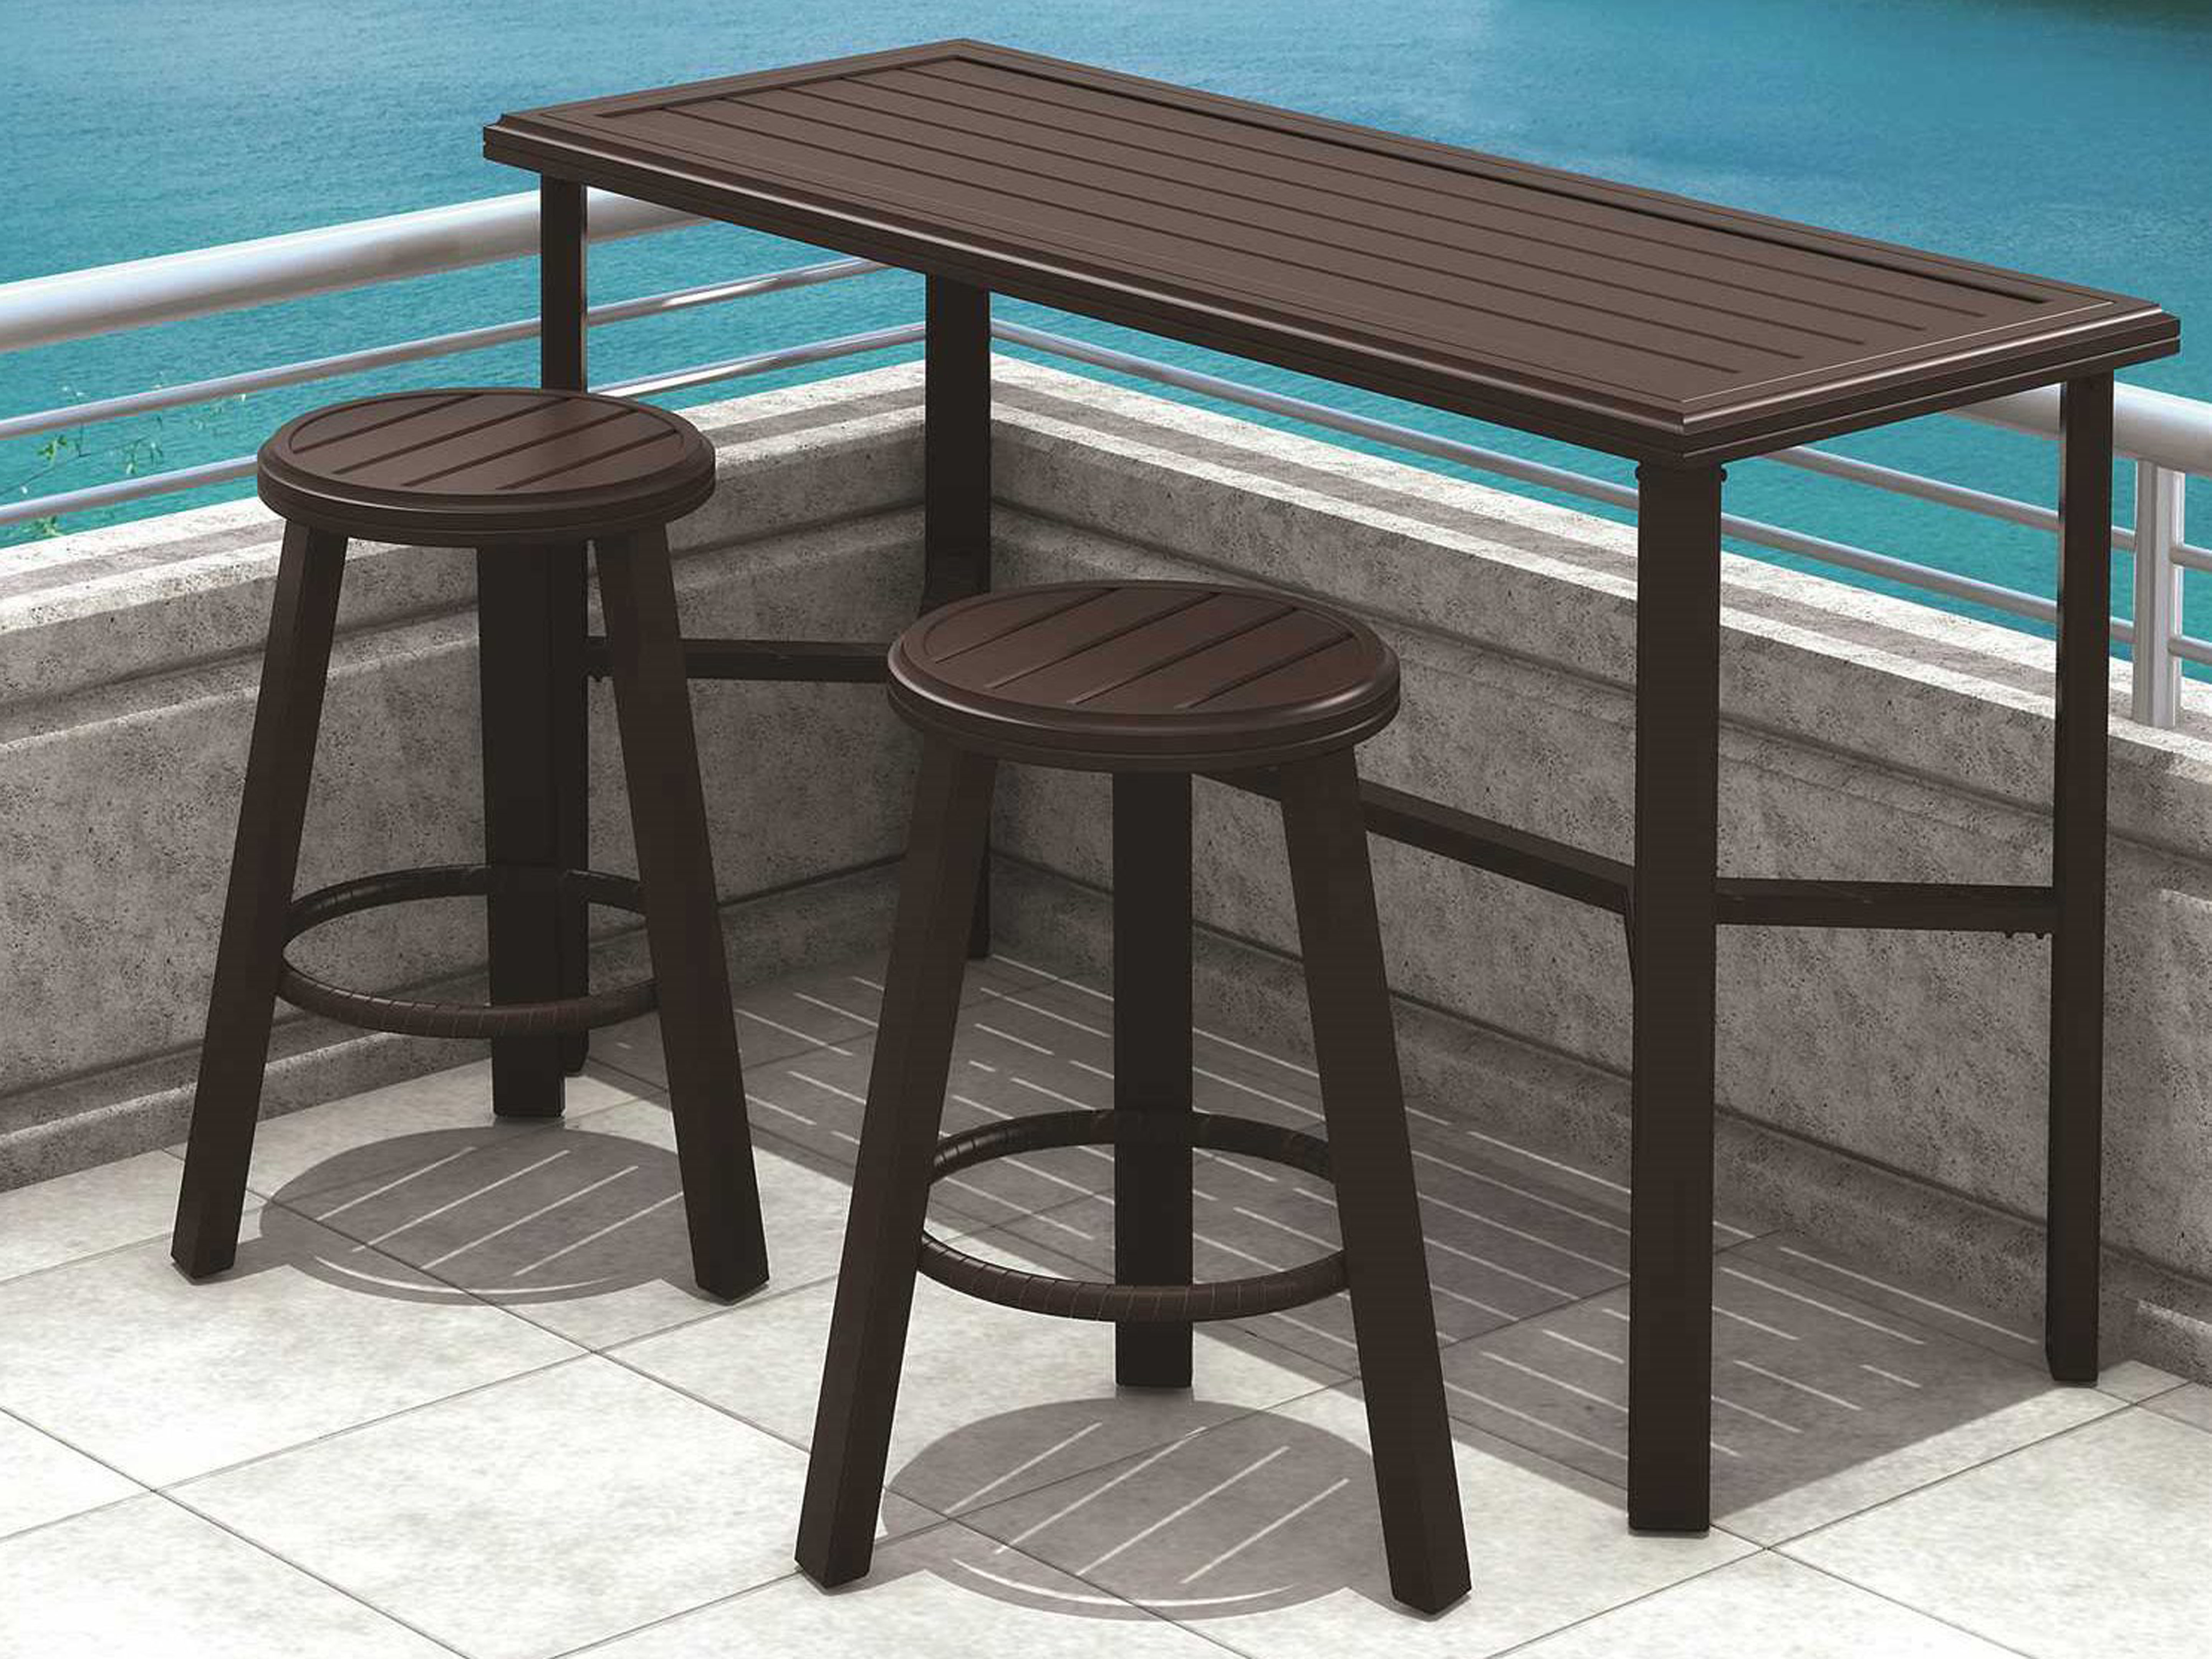 patio bar table in kitchen ideas